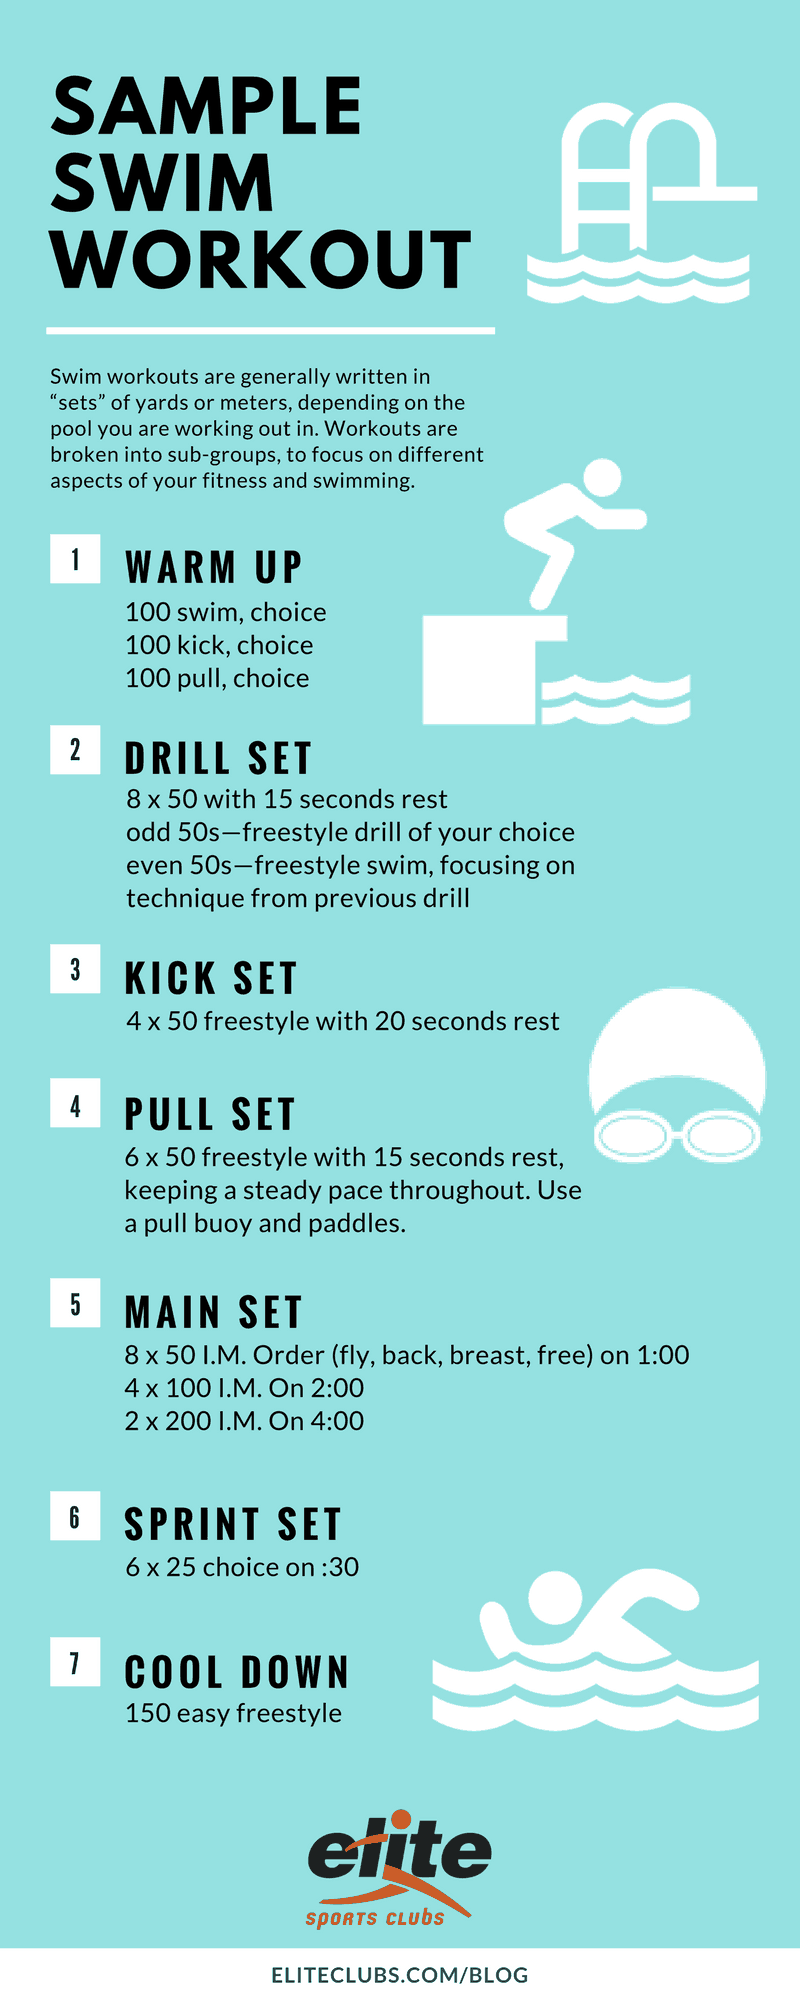 Best Swim Workouts for Beginner, Intermediate and Advanced